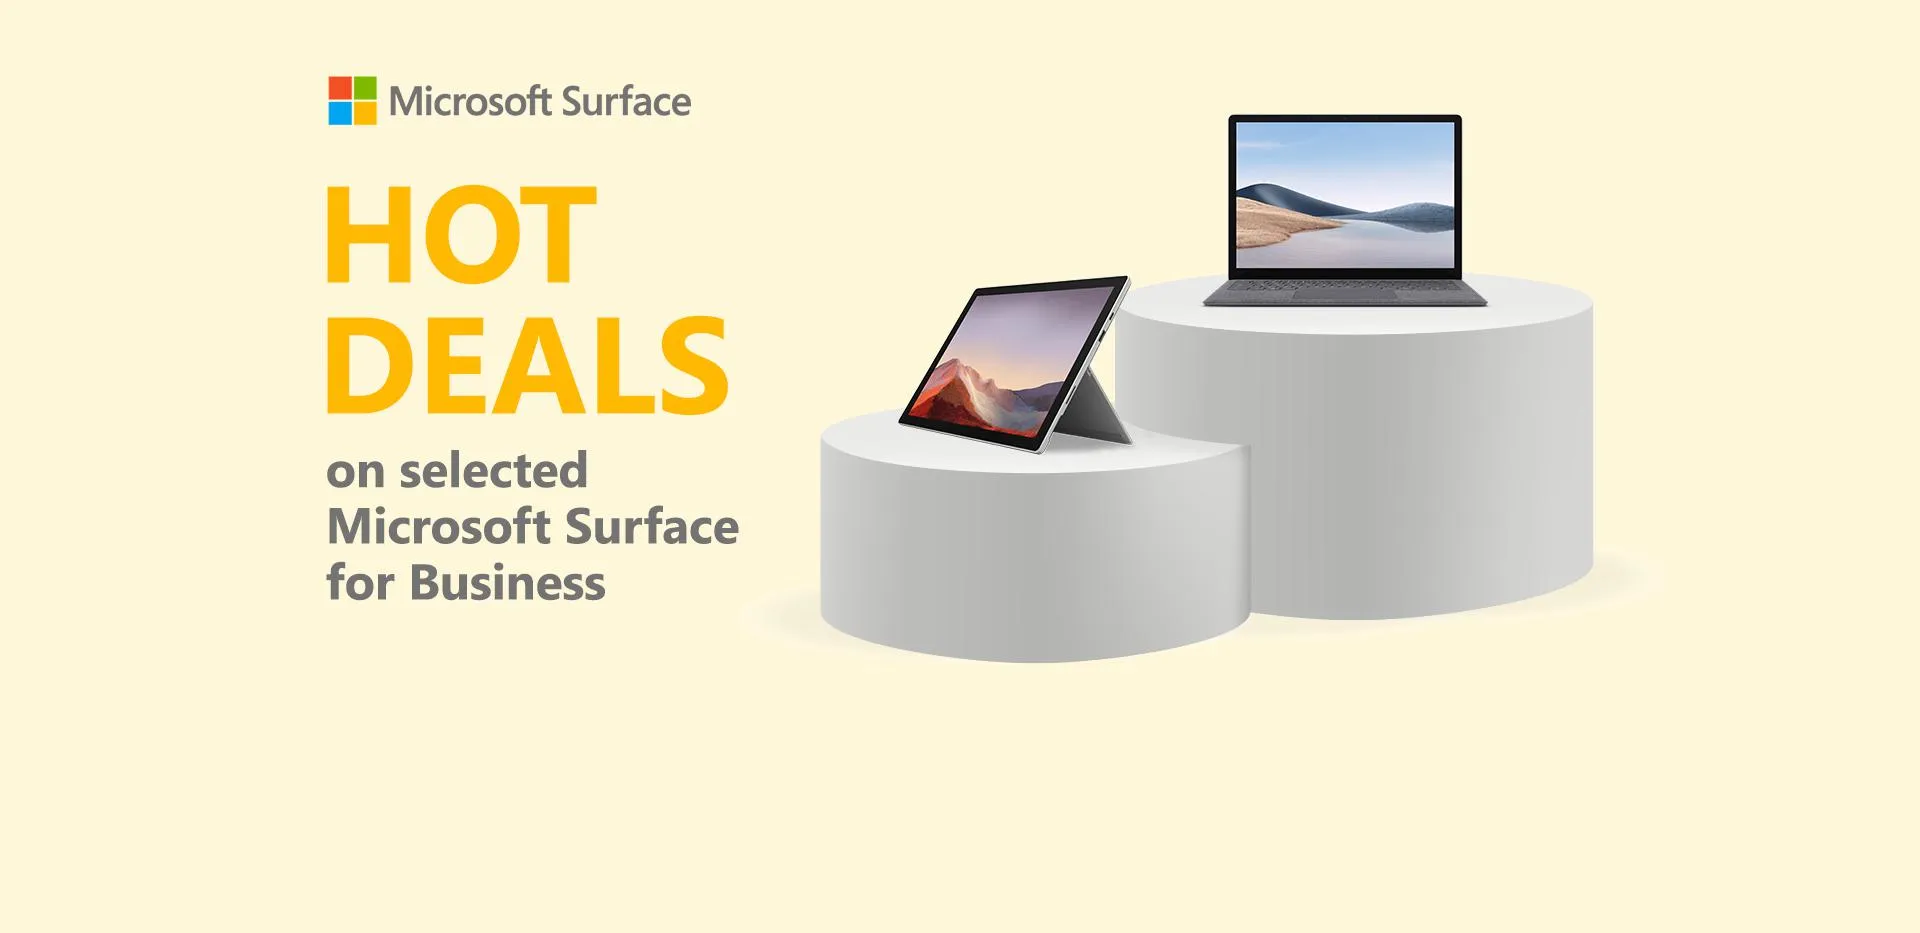 Hot Deals on selected Microsoft Surface for Business